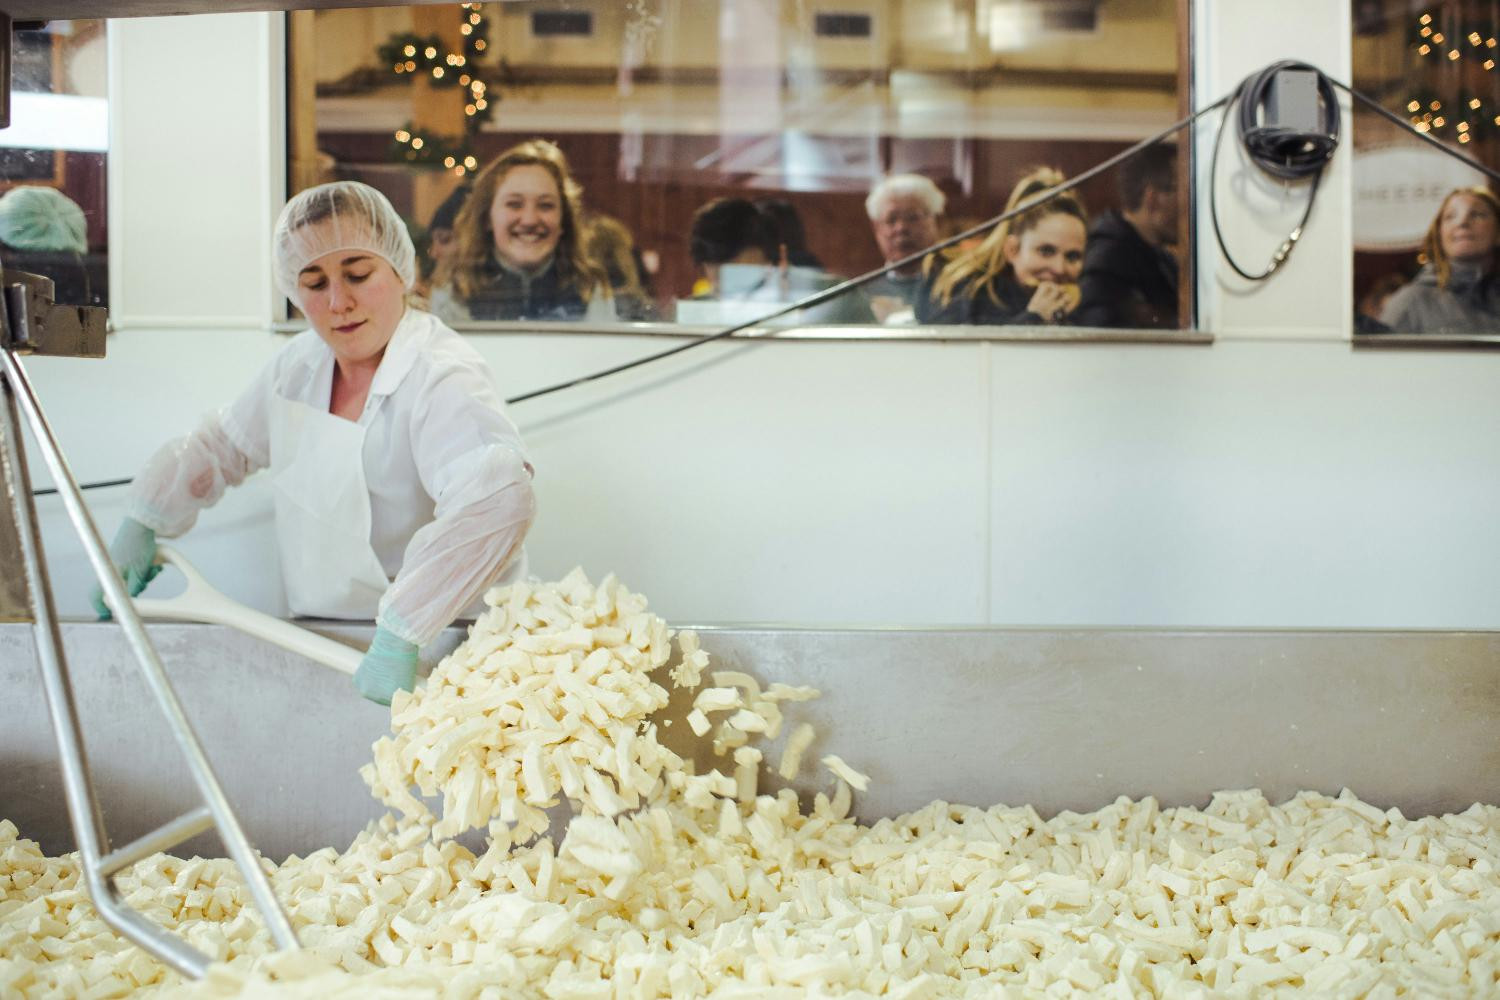 Our Cheesemakers work at the Pike Place Market in Seattle.